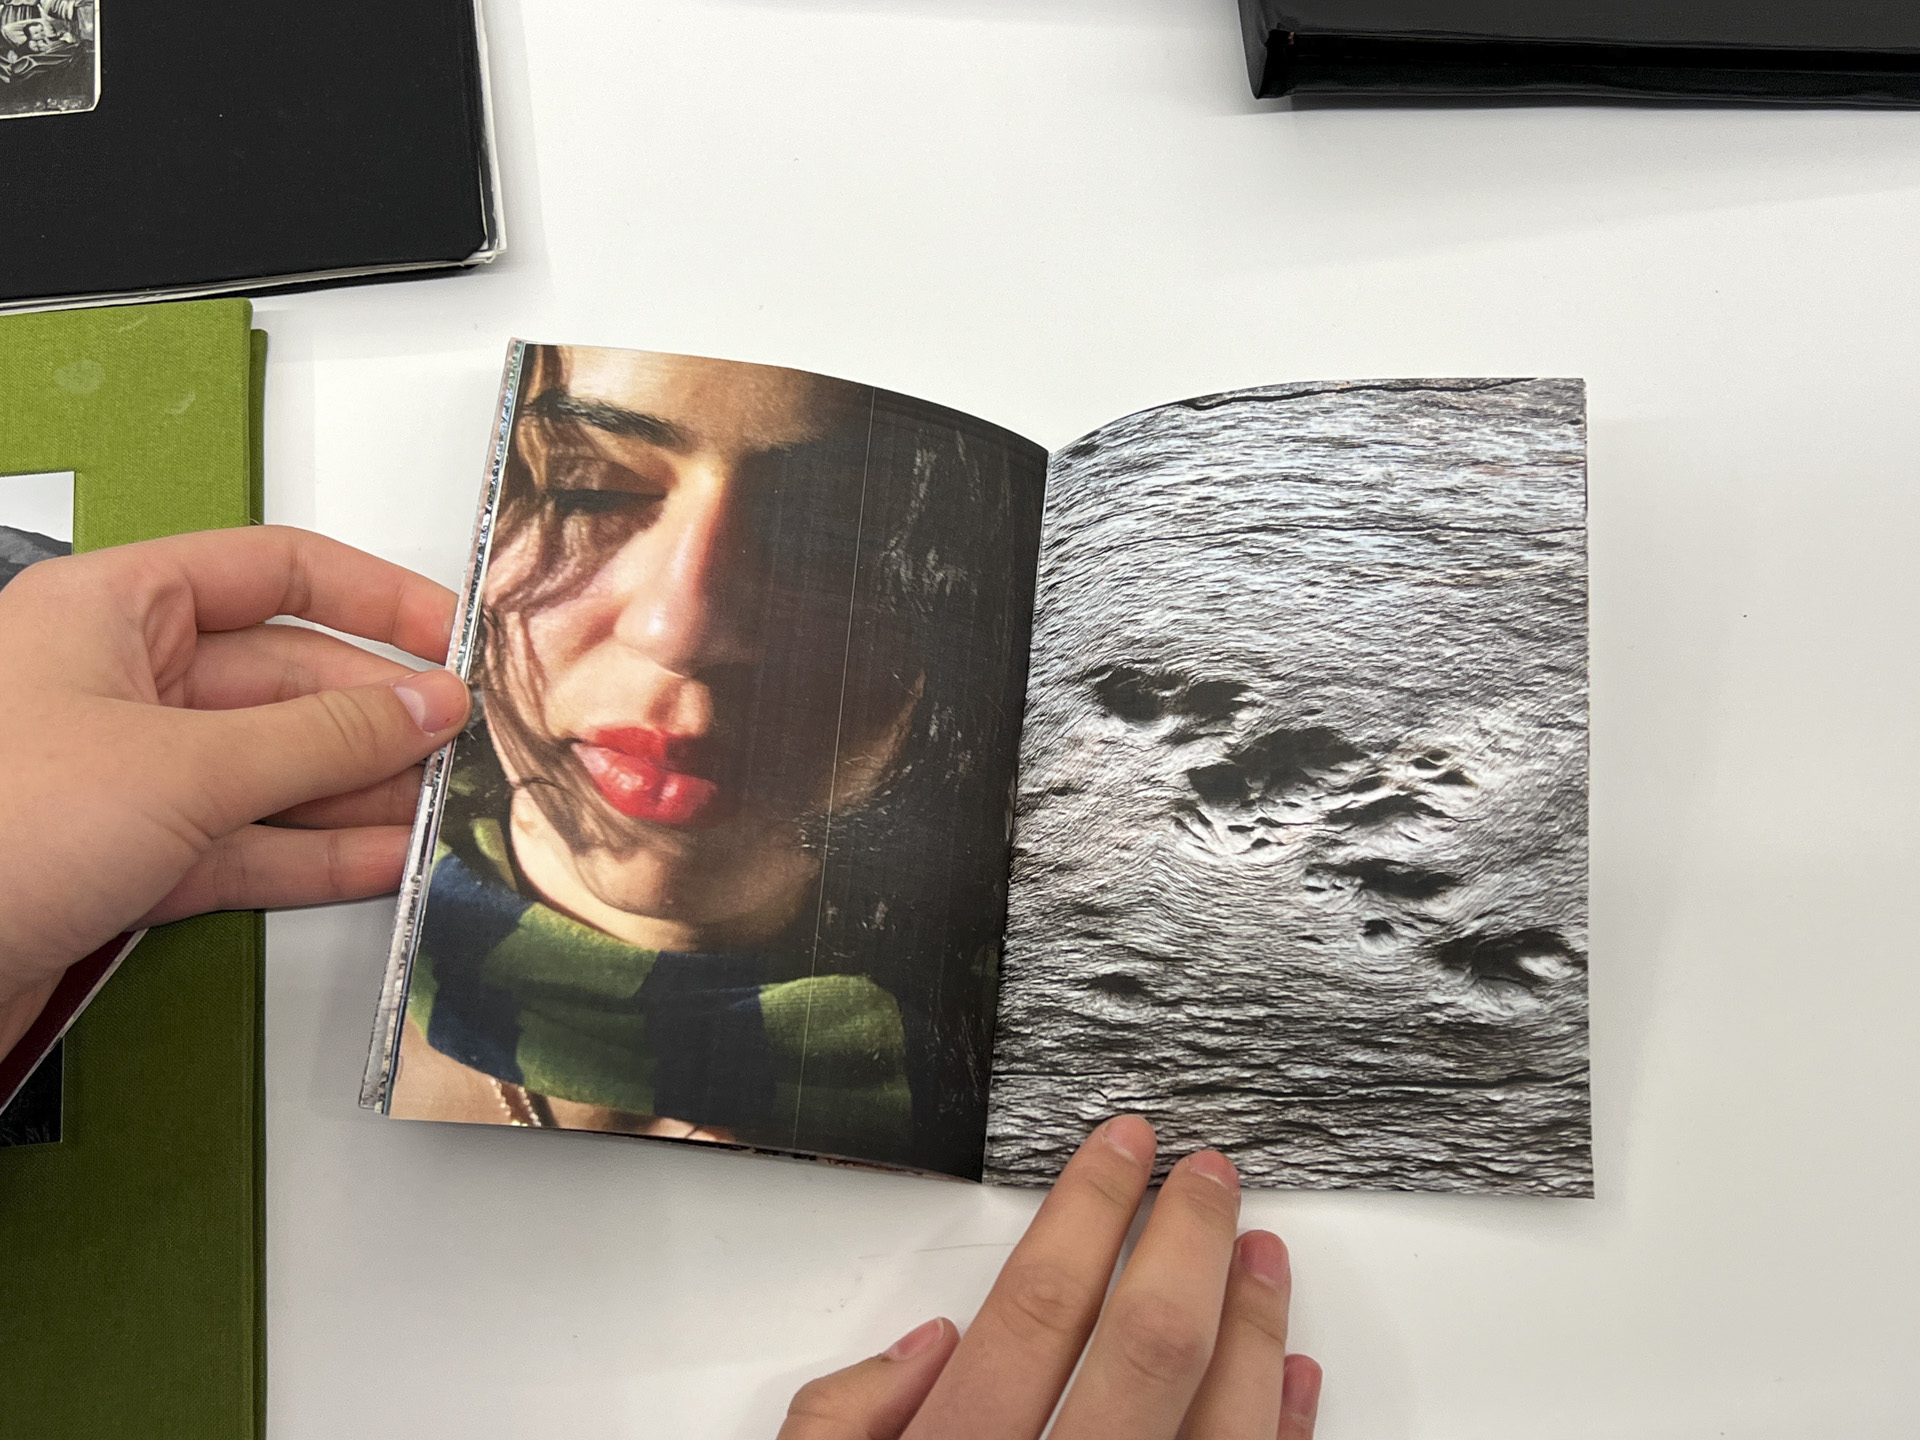 book opened to a photo of a face vs. grey abstract landscape